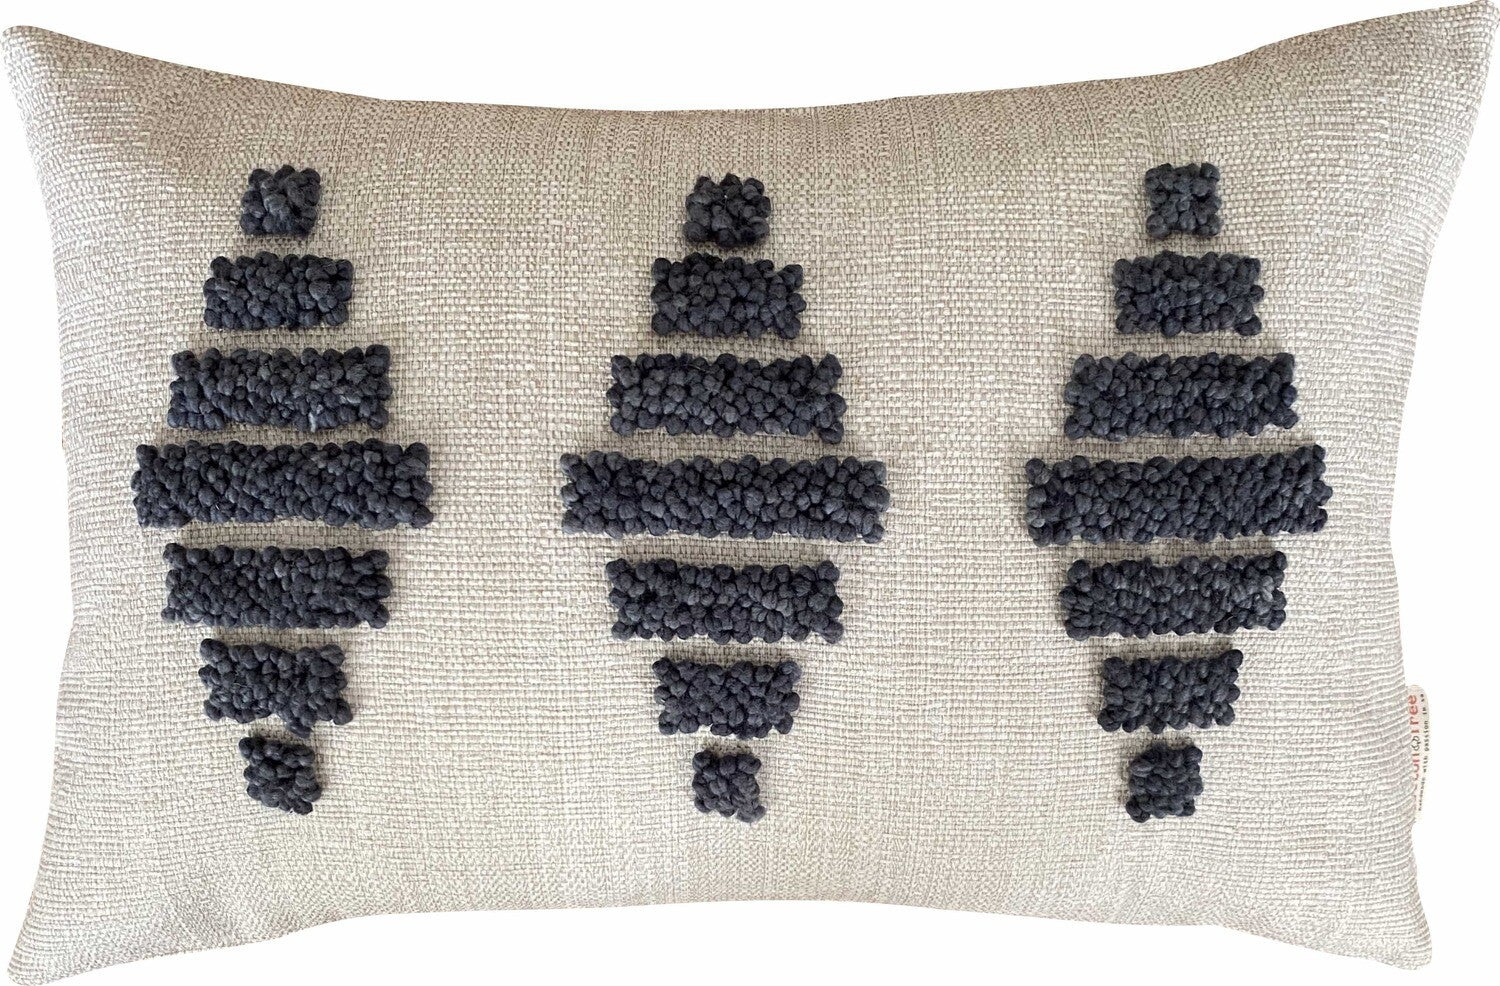 Scatter_Cushion_Punchneedle_African_Zulu_Natural_Charcoal